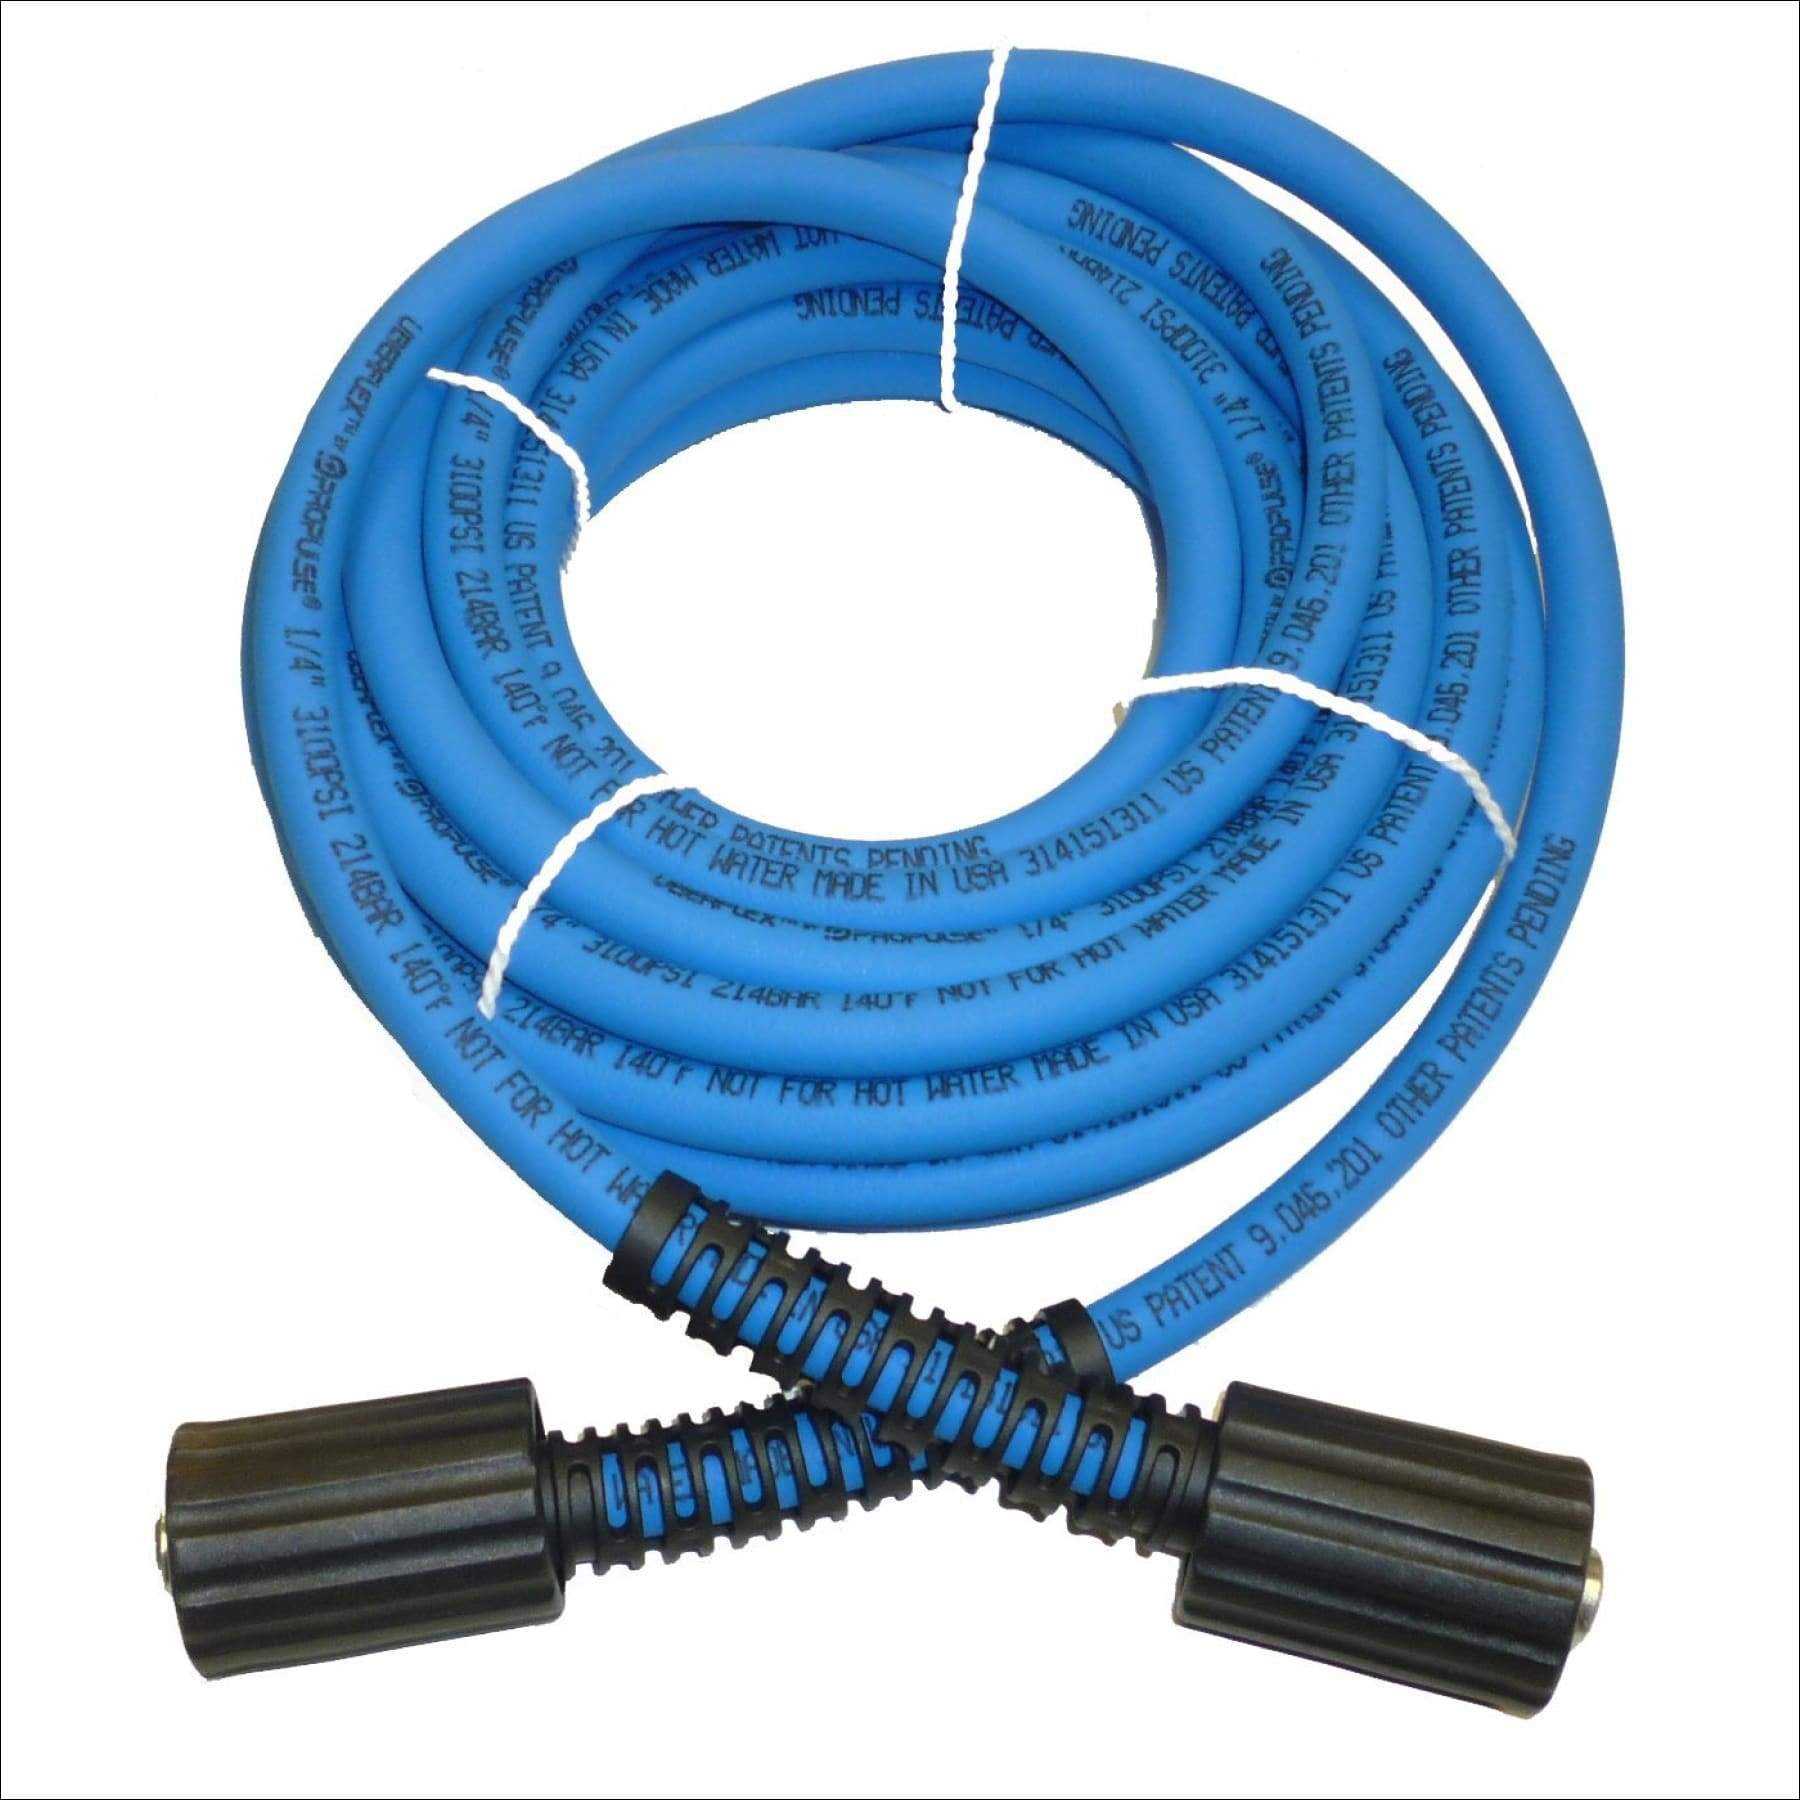 1/4" x 25' 3200 PSI 22MM-14 x 22MM-14 Pressure Washer Hose 196006GS Replacemen 